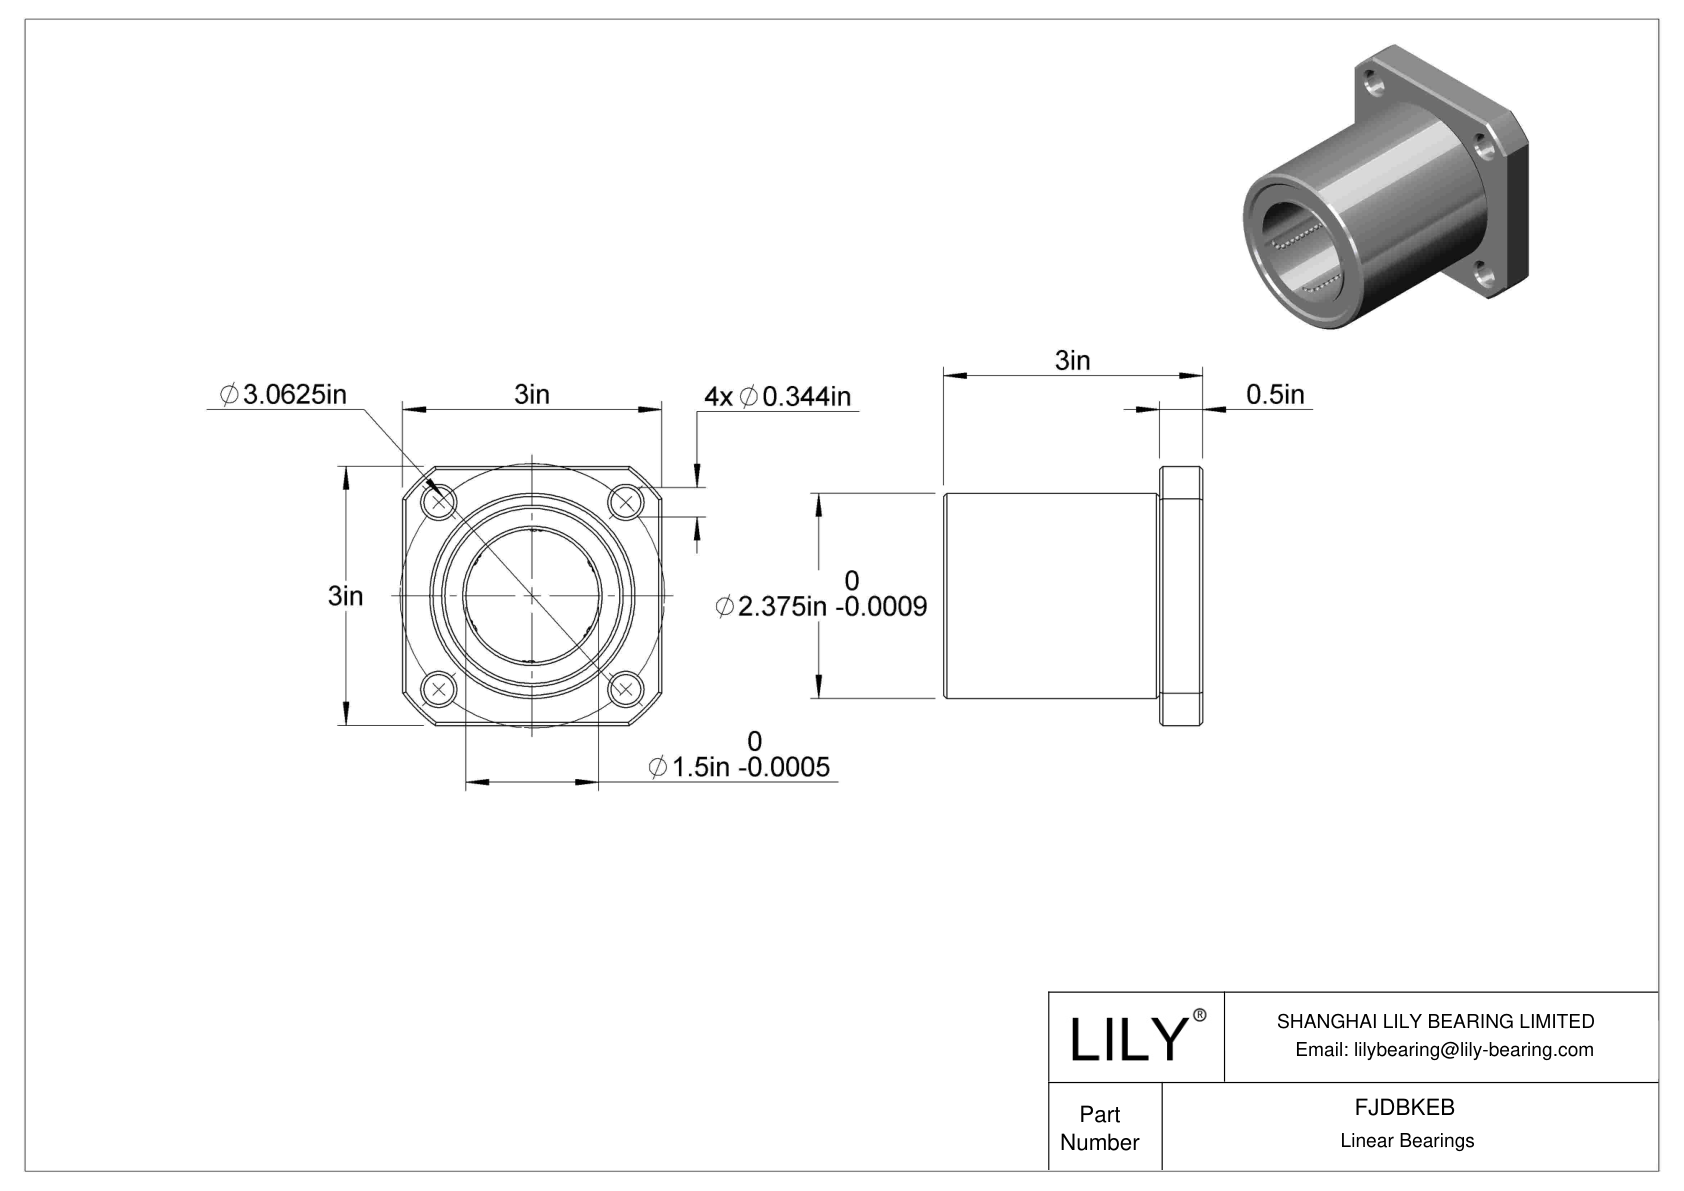 FJDBKEB Corrosion-Resistant Flange-Mounted Linear Ball Bearings cad drawing